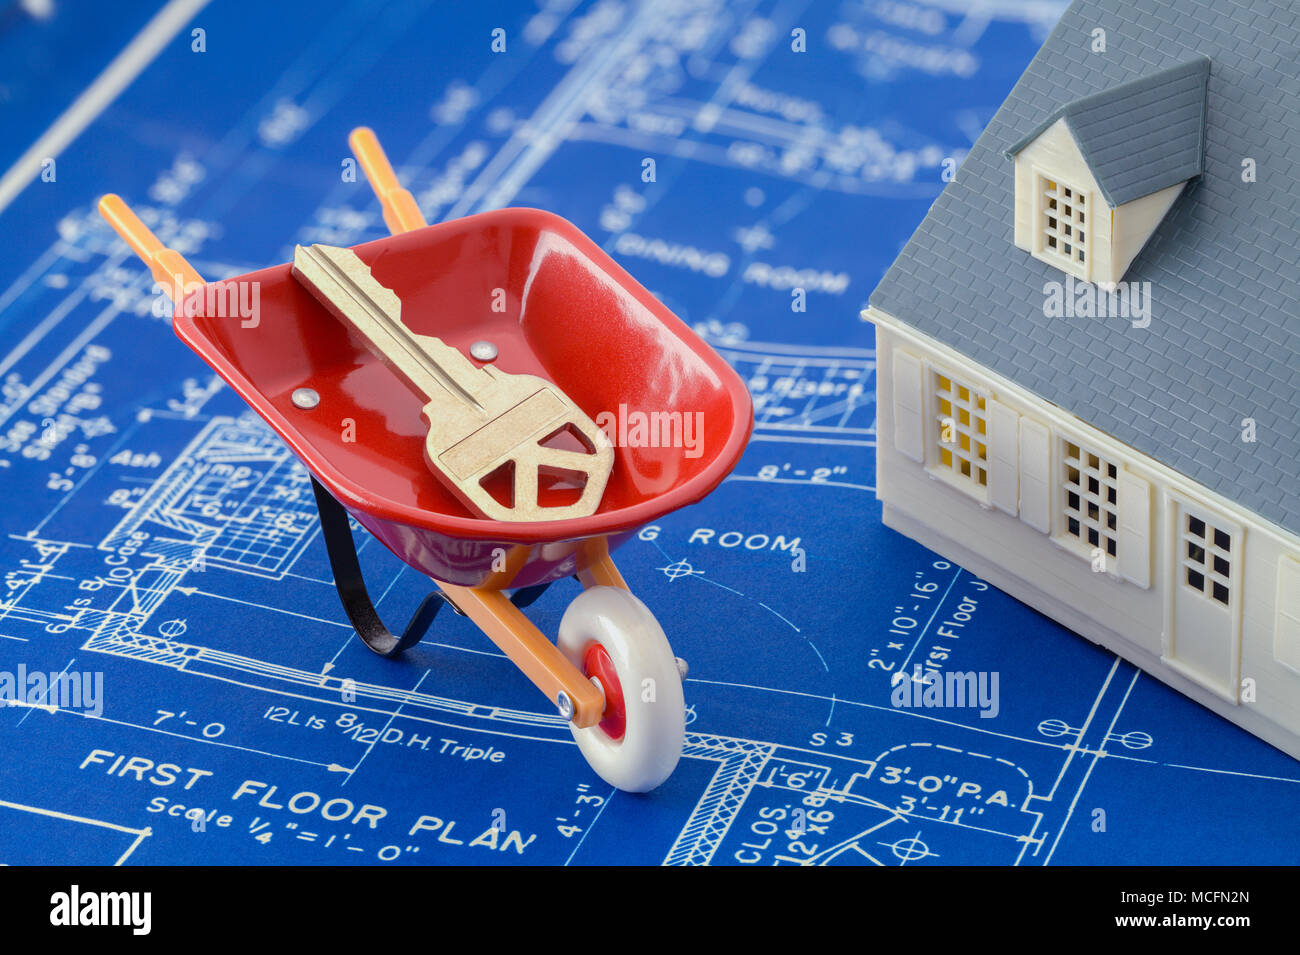 Blueprints with a Model House and Wheel Barrow with Key. Stock Photo